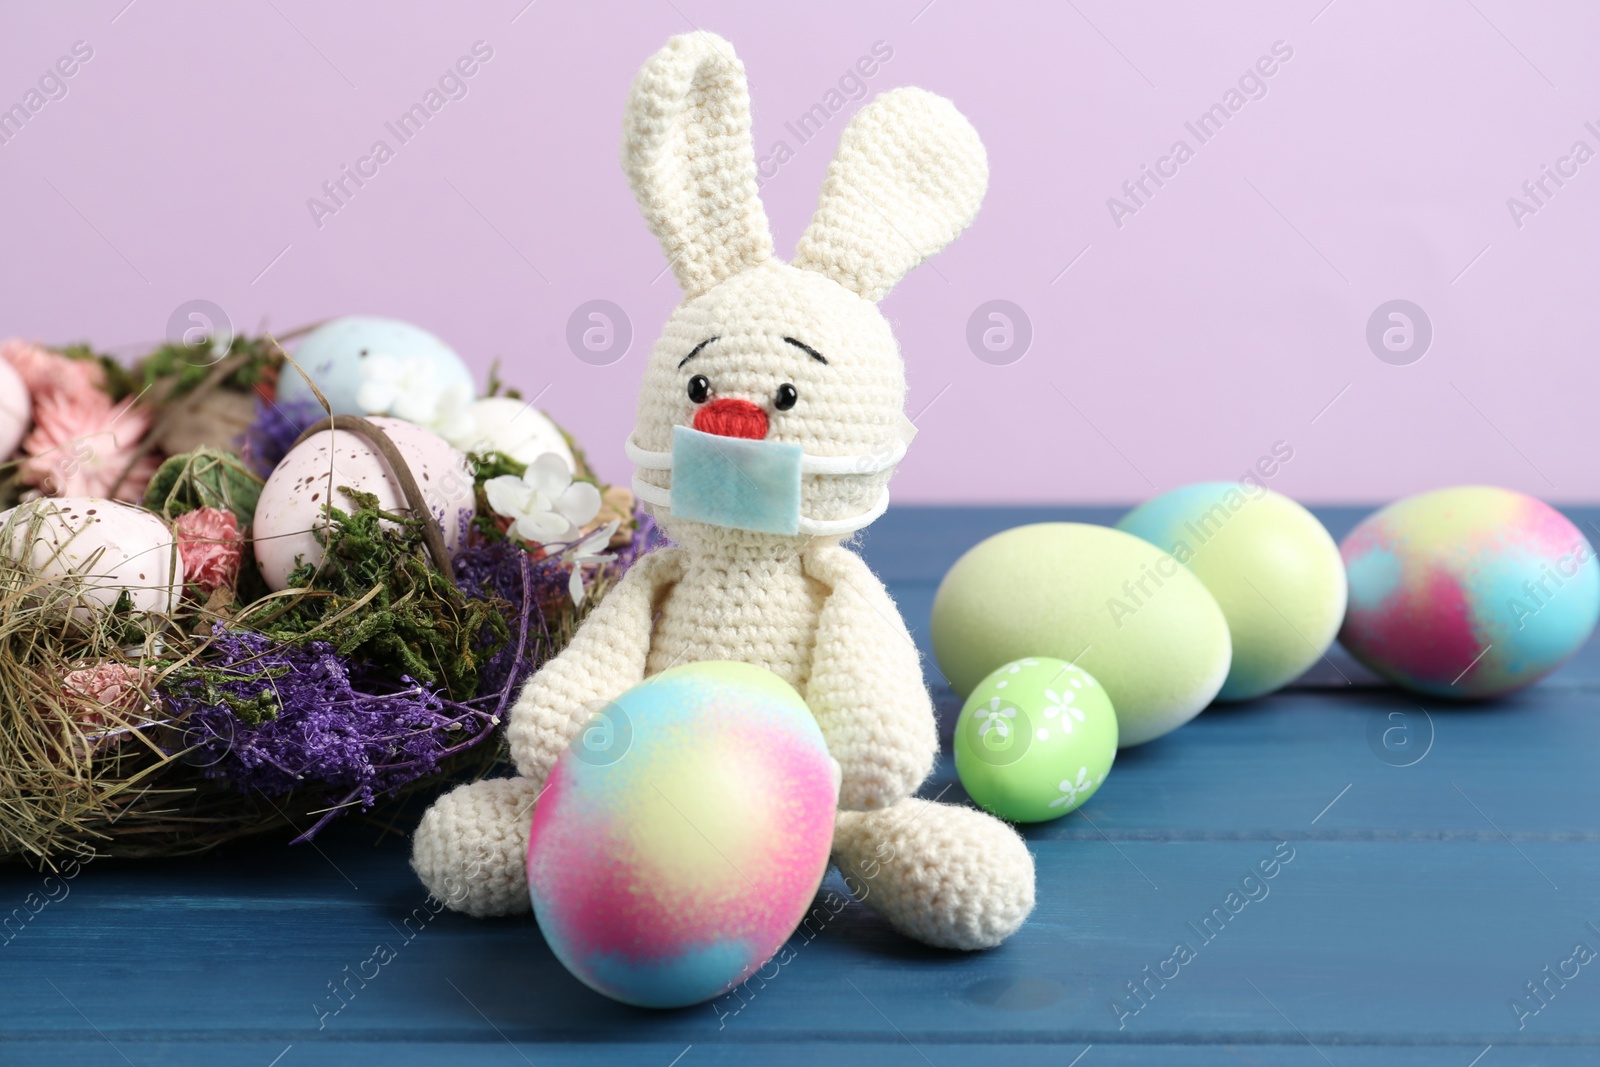 Photo of Toy bunny with protective mask and painted eggs on blue wooden table. Easter holiday during COVID-19 quarantine